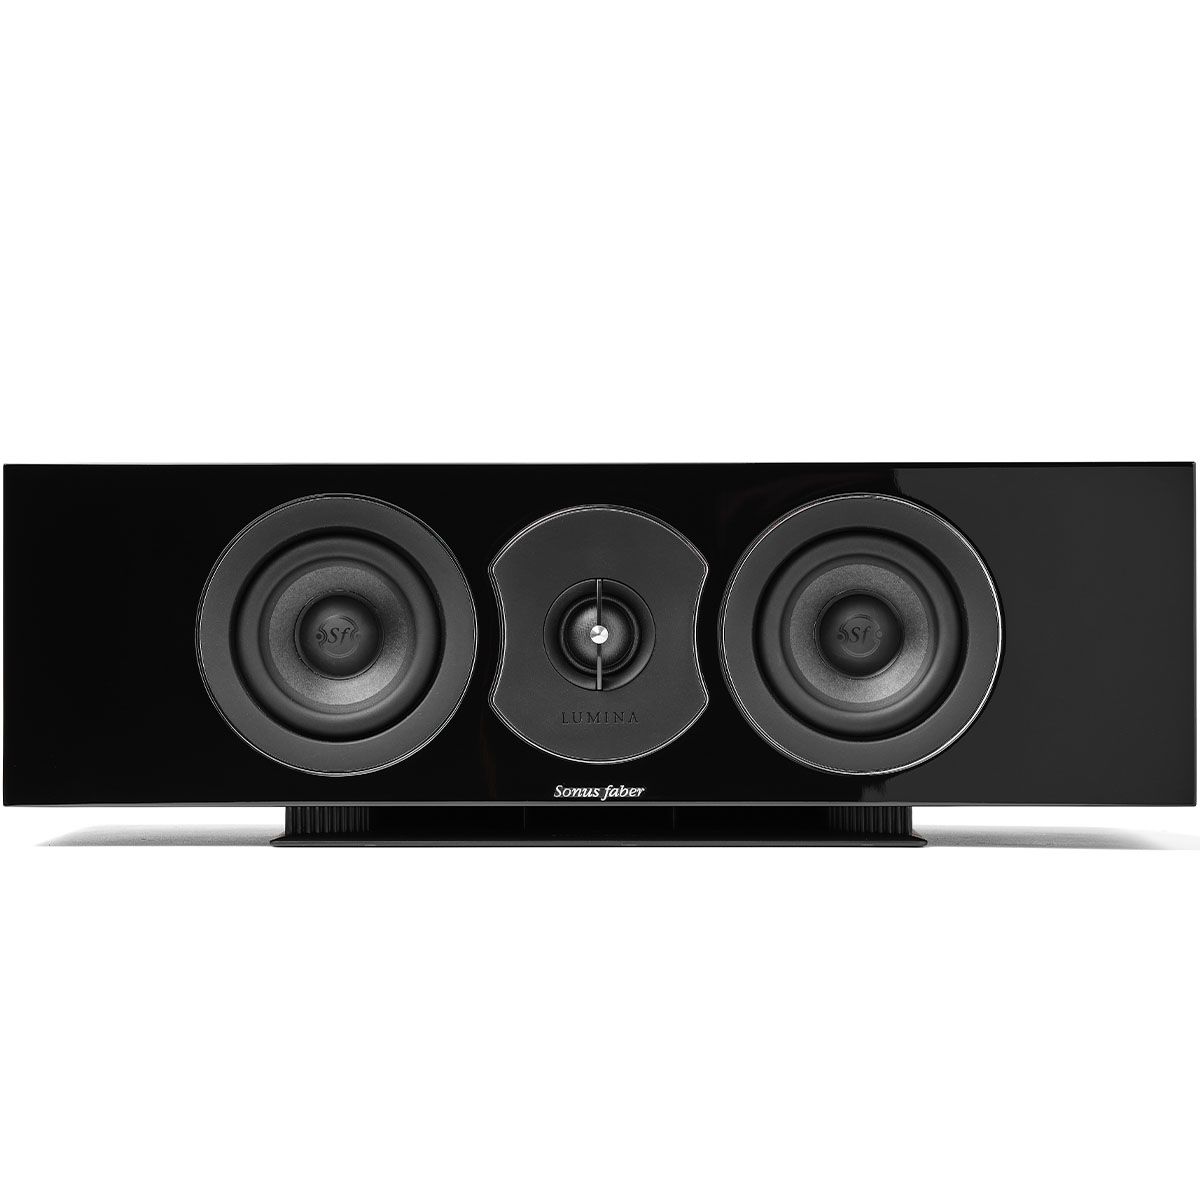 Sonus Faber Lumina Center Channel Speaker - Black - front view without grille